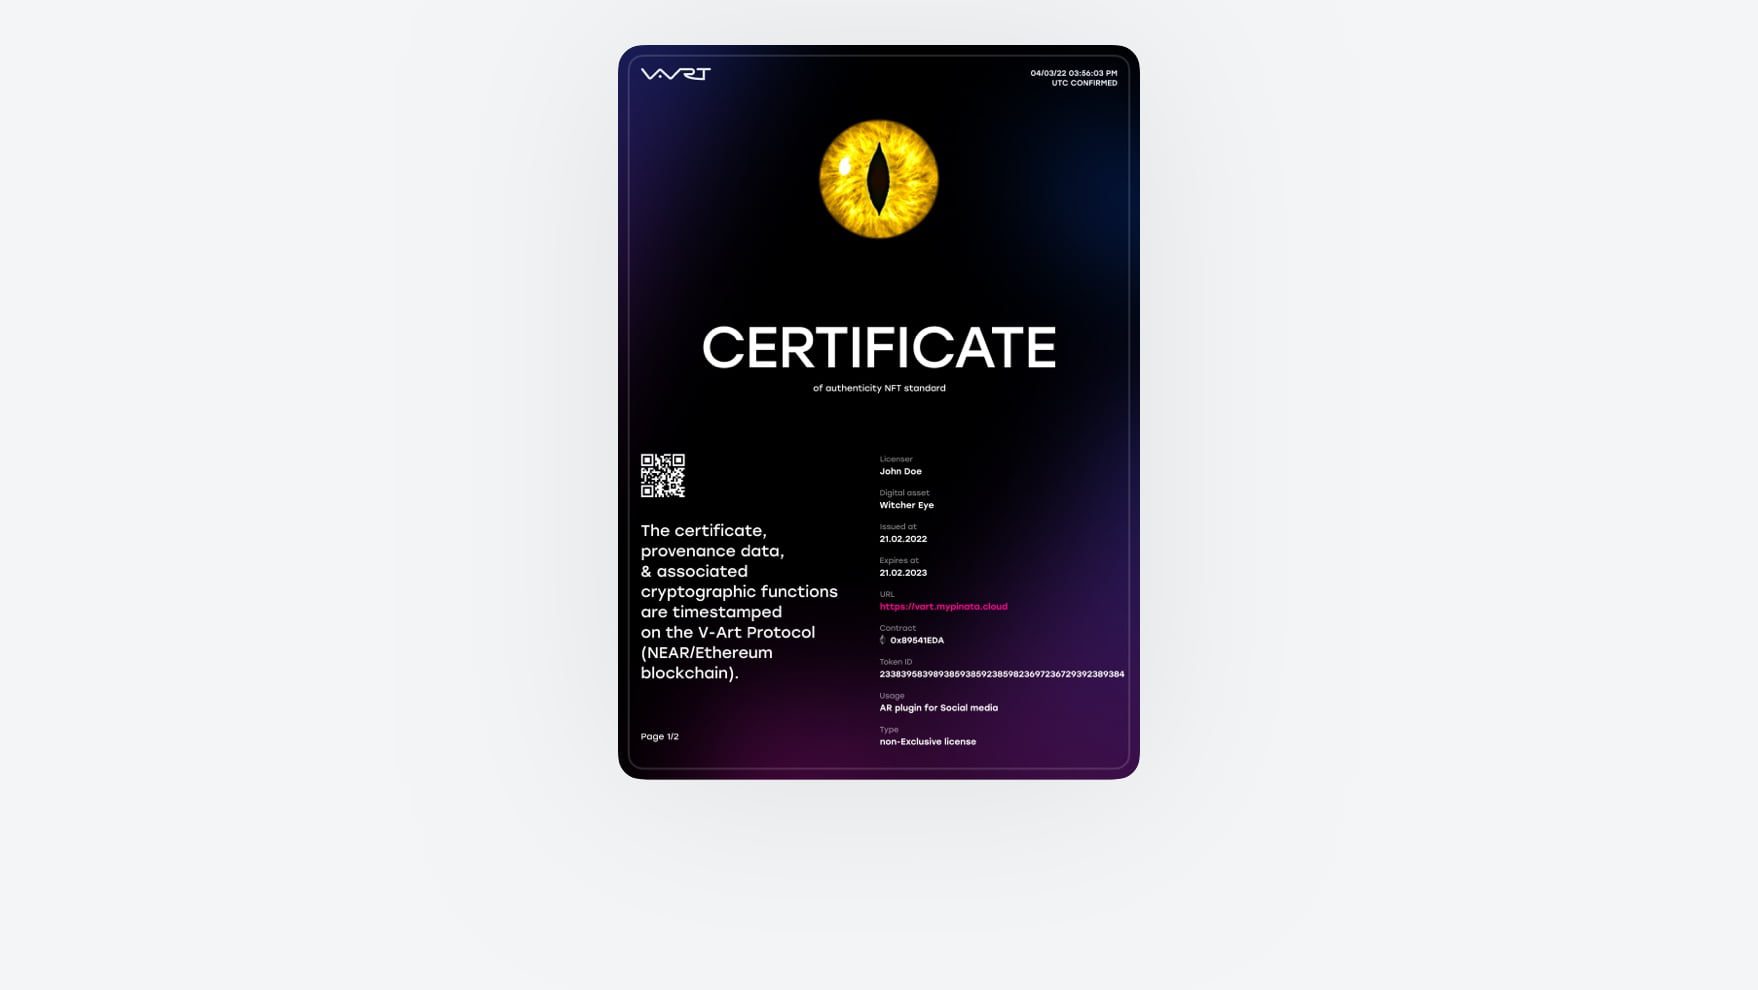 Buyer gets a certificate with IP rights for using custom NFT